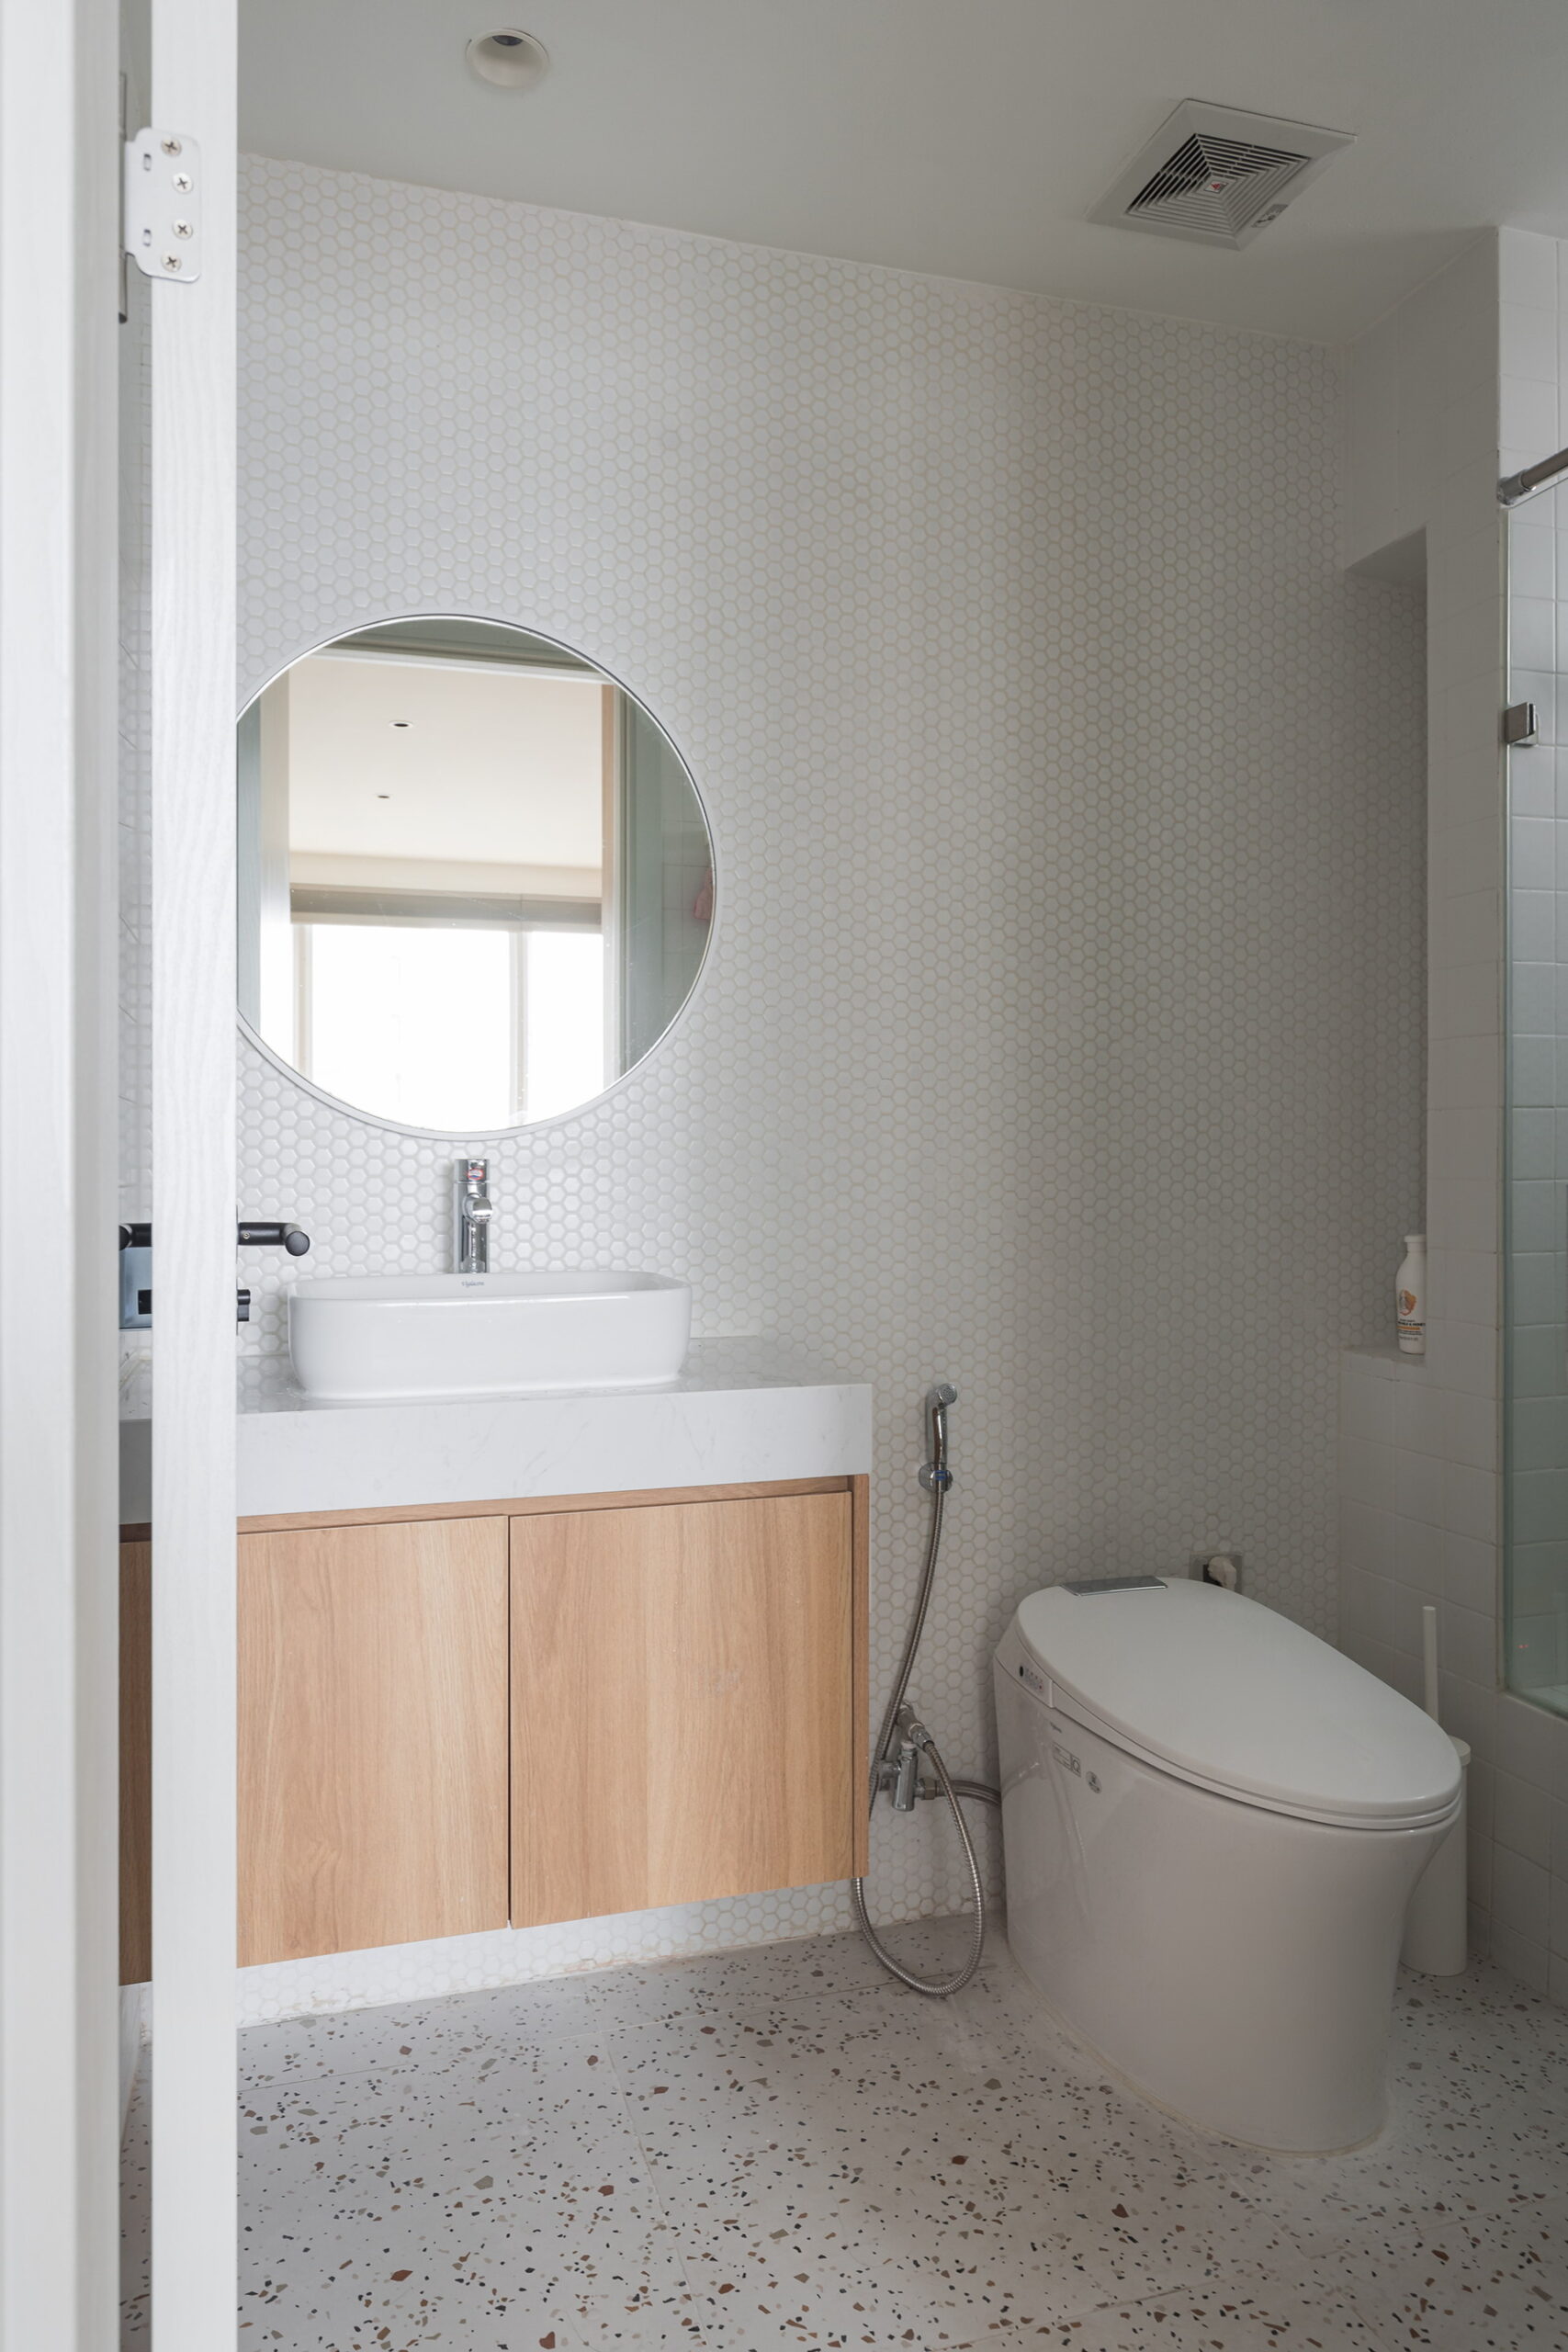 The bathroom uses white mosaic tiles and square tiles, making space more organized, in tune with kitchen tiles.